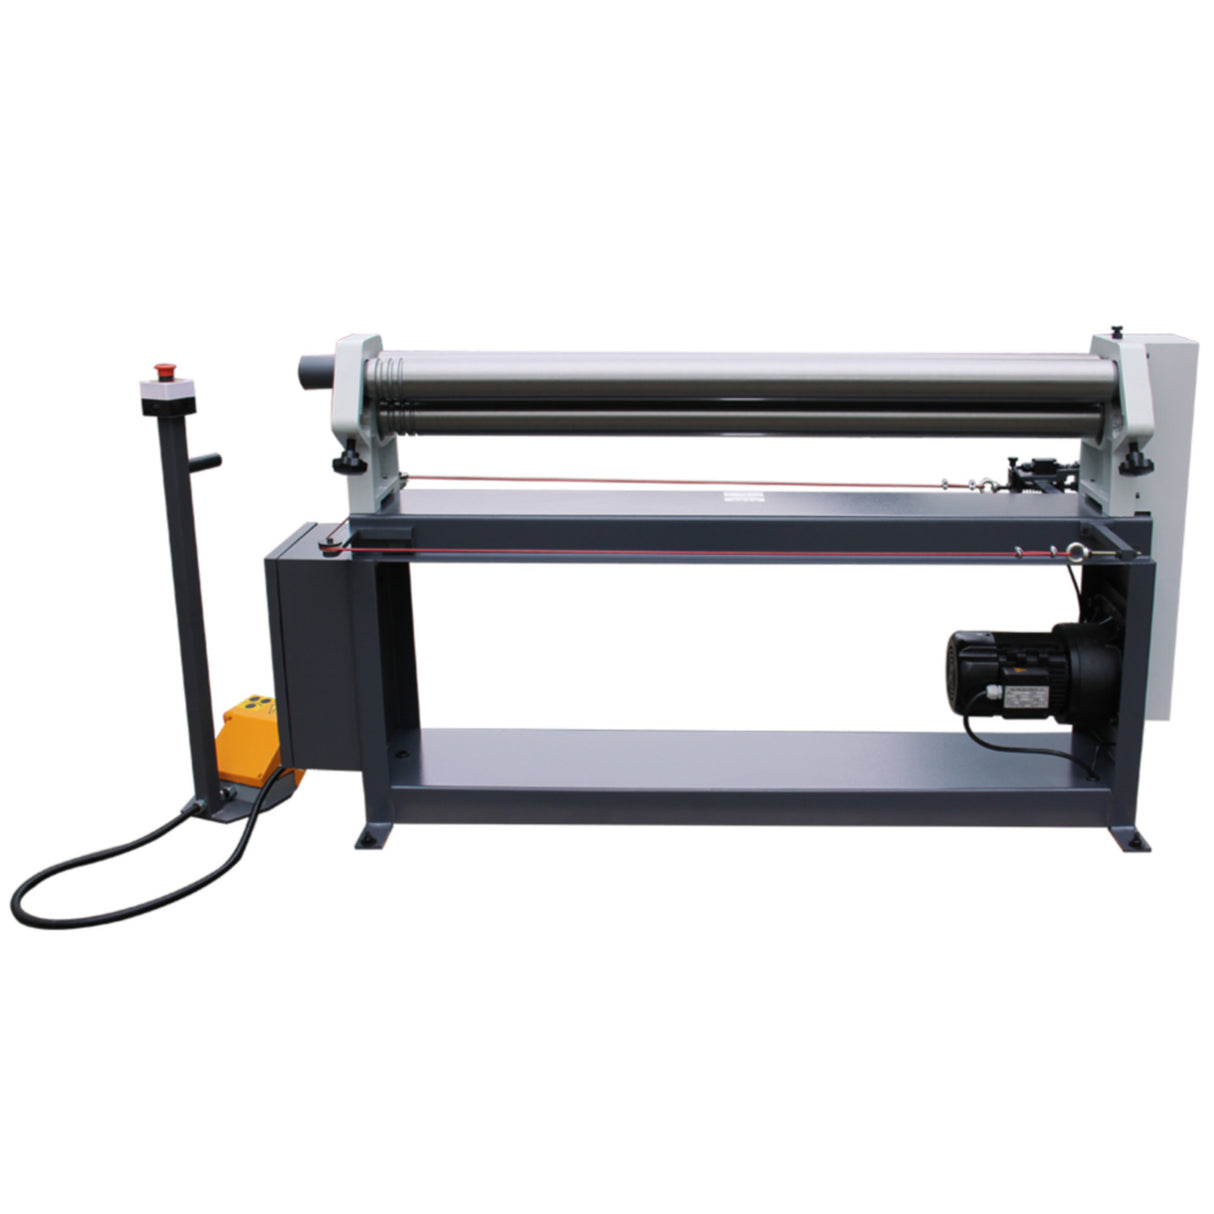 KANG Industrial ESR-5116 Electric Slip Roll Machine, Plate Rolling Machines with 1 PH Motor